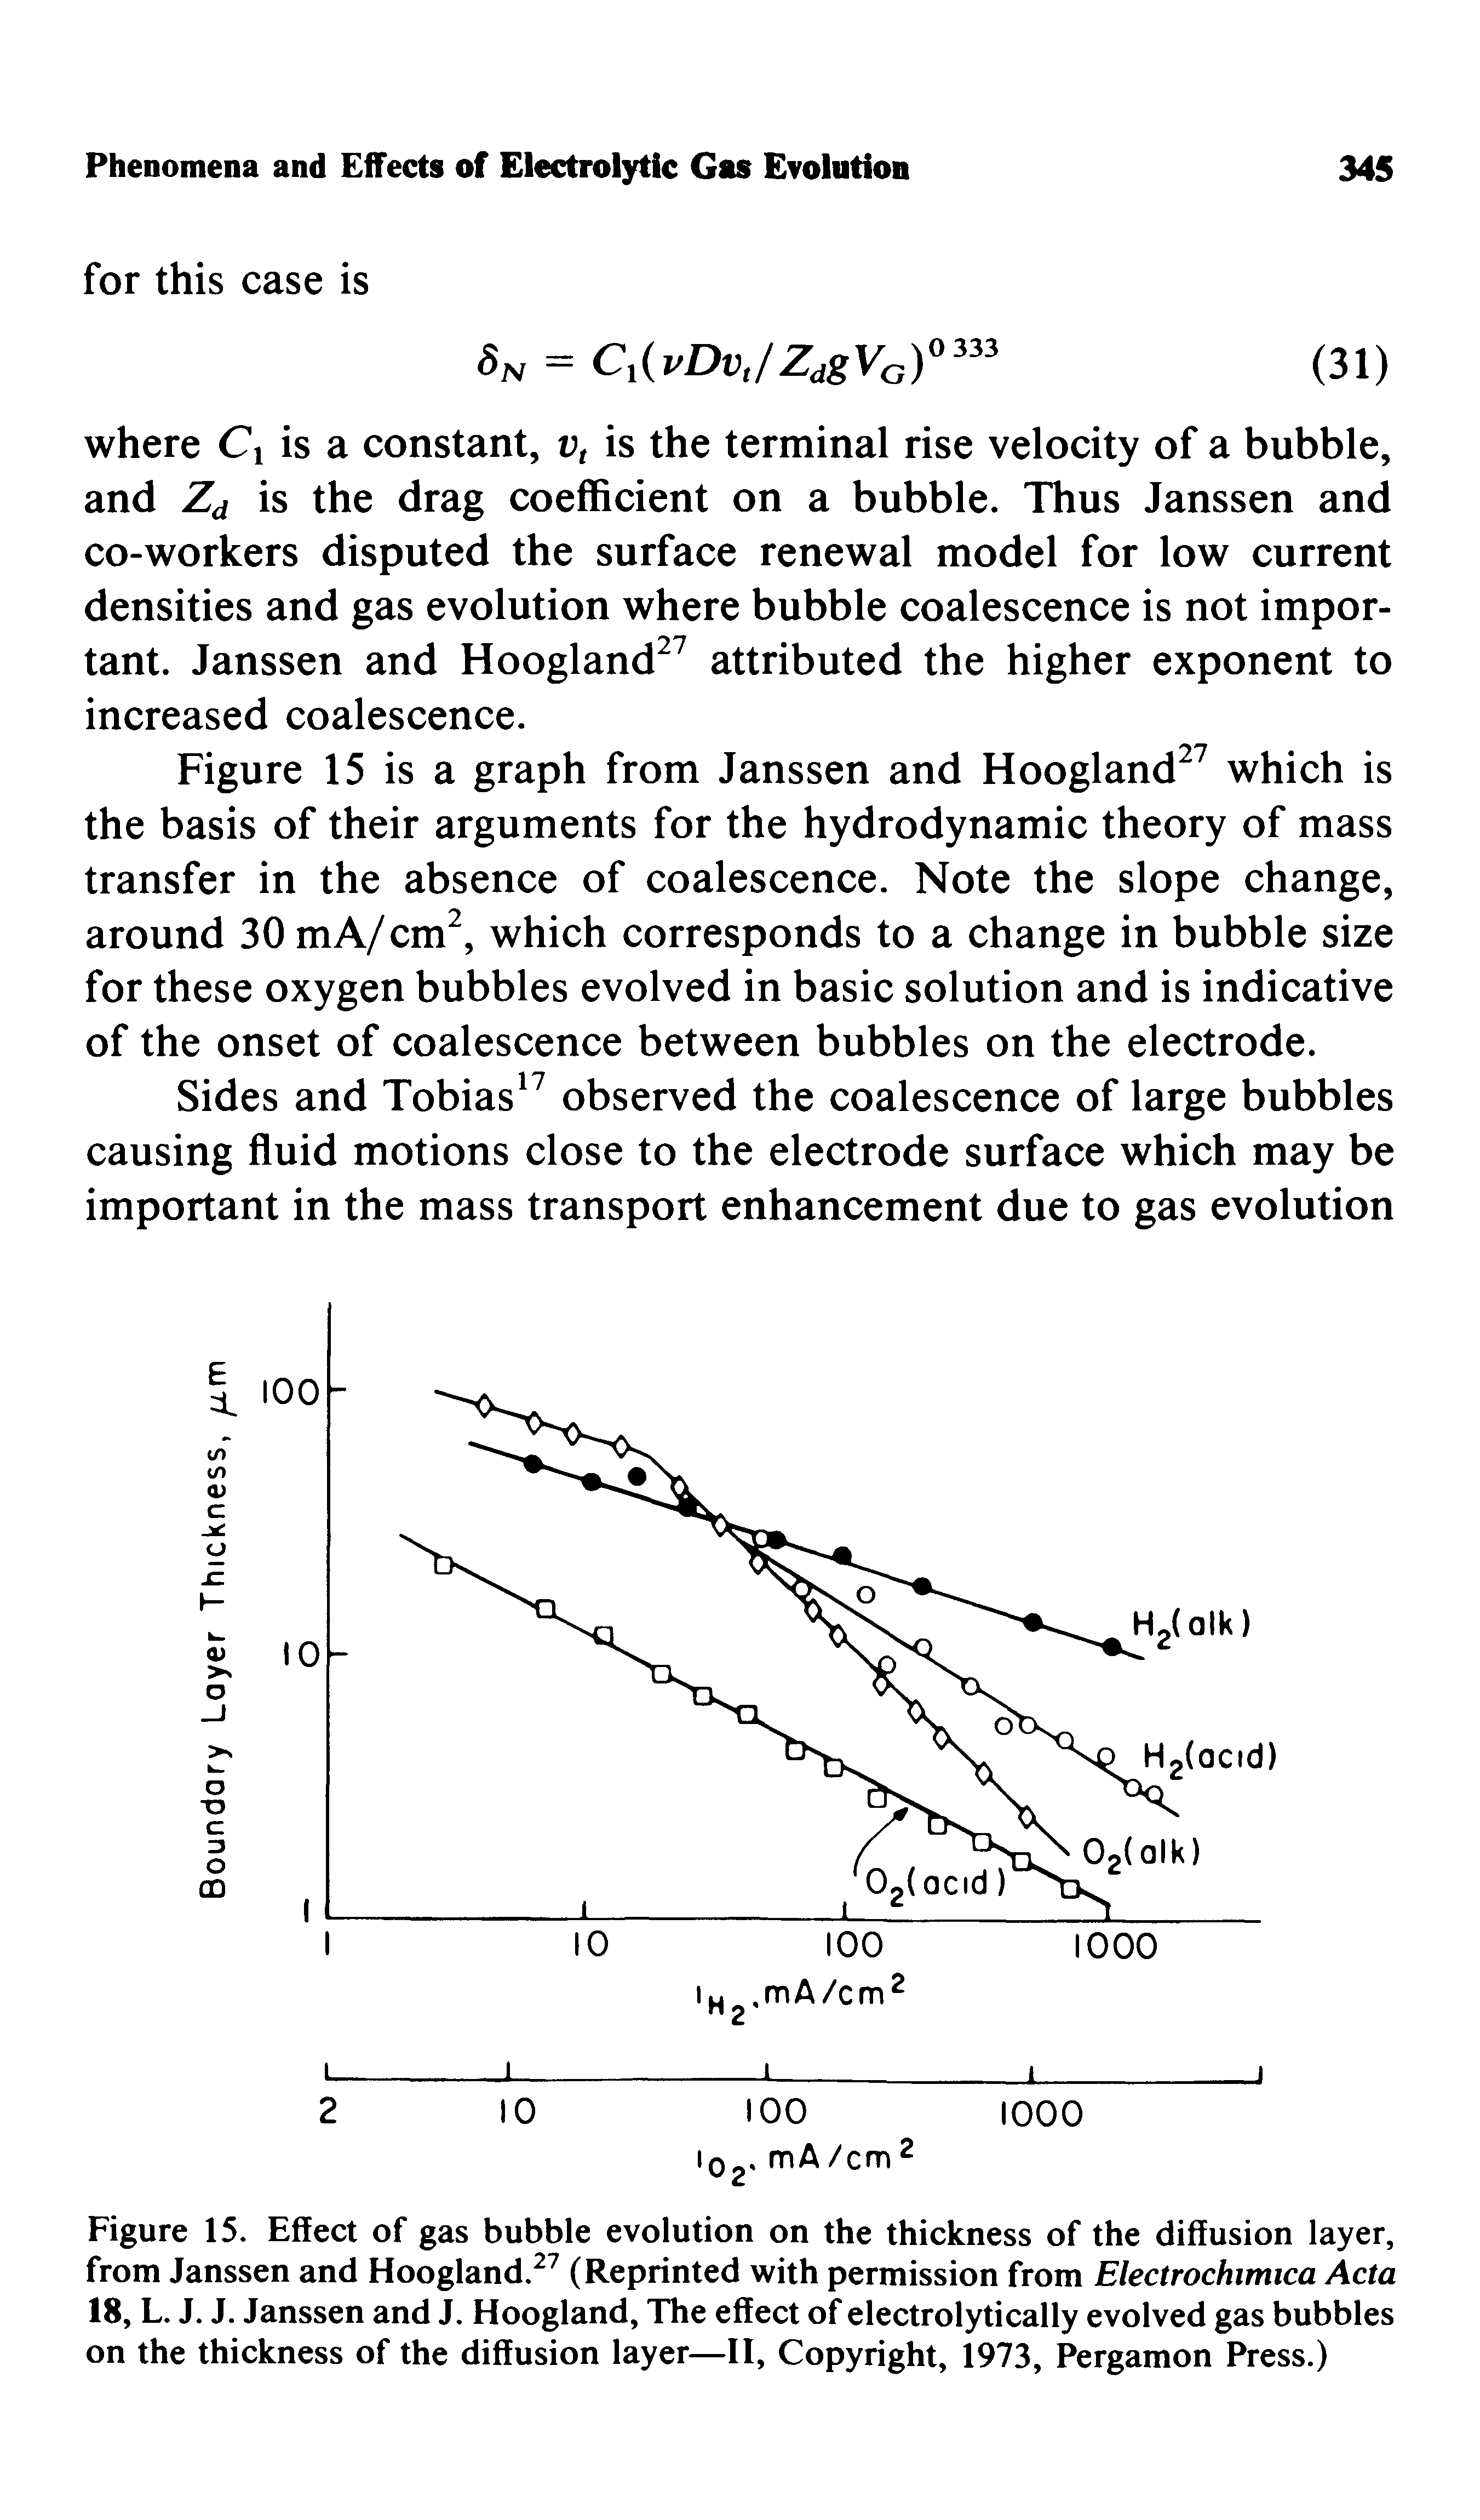 Figure 15. Effect of gas bubble evolution on the thickness of the diffusion layer, from Janssen and Hoogland.27 (Reprinted with permission from Electrochimica Acta 18, L. J. J. Janssen and J. Hoogland, The effect of electrolytically evolved gas bubbles on the thickness of the diffusion layer—II, Copyright, 1973, Pergamon Press.)...